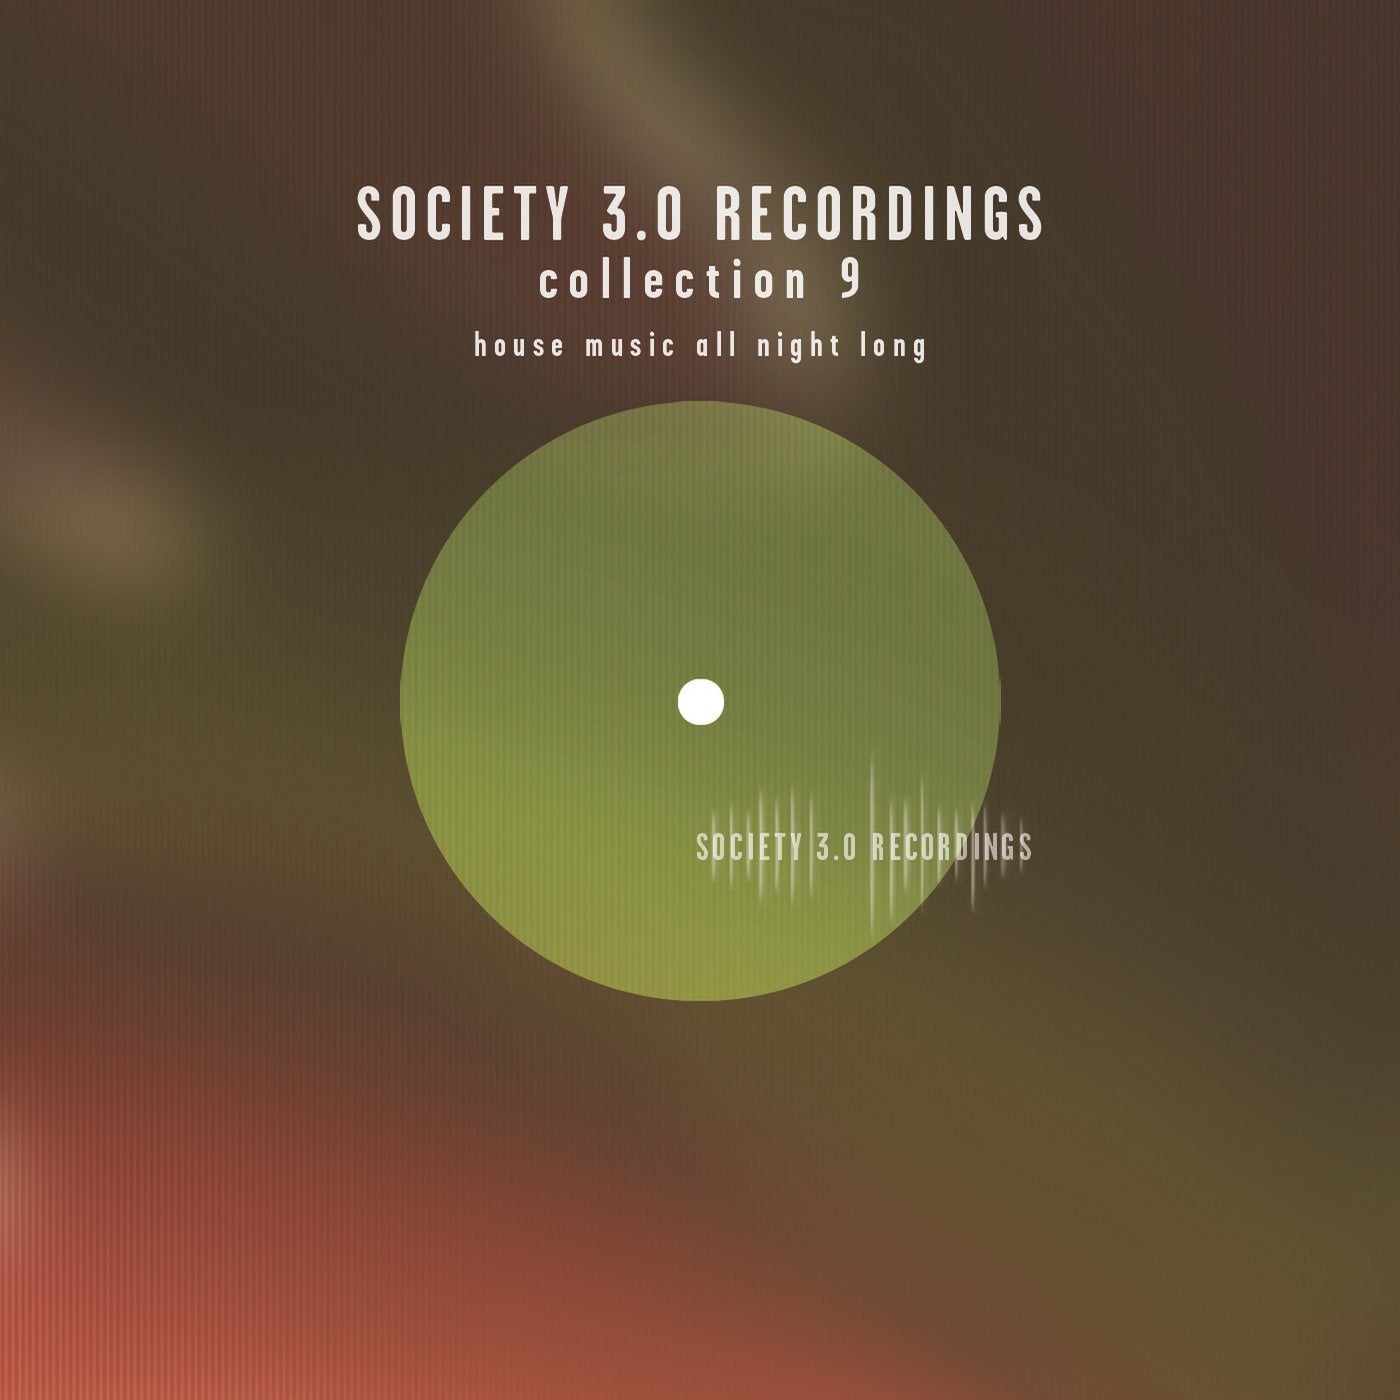 Society 3.0 Recordings Collection Nine - House Music All Night Long